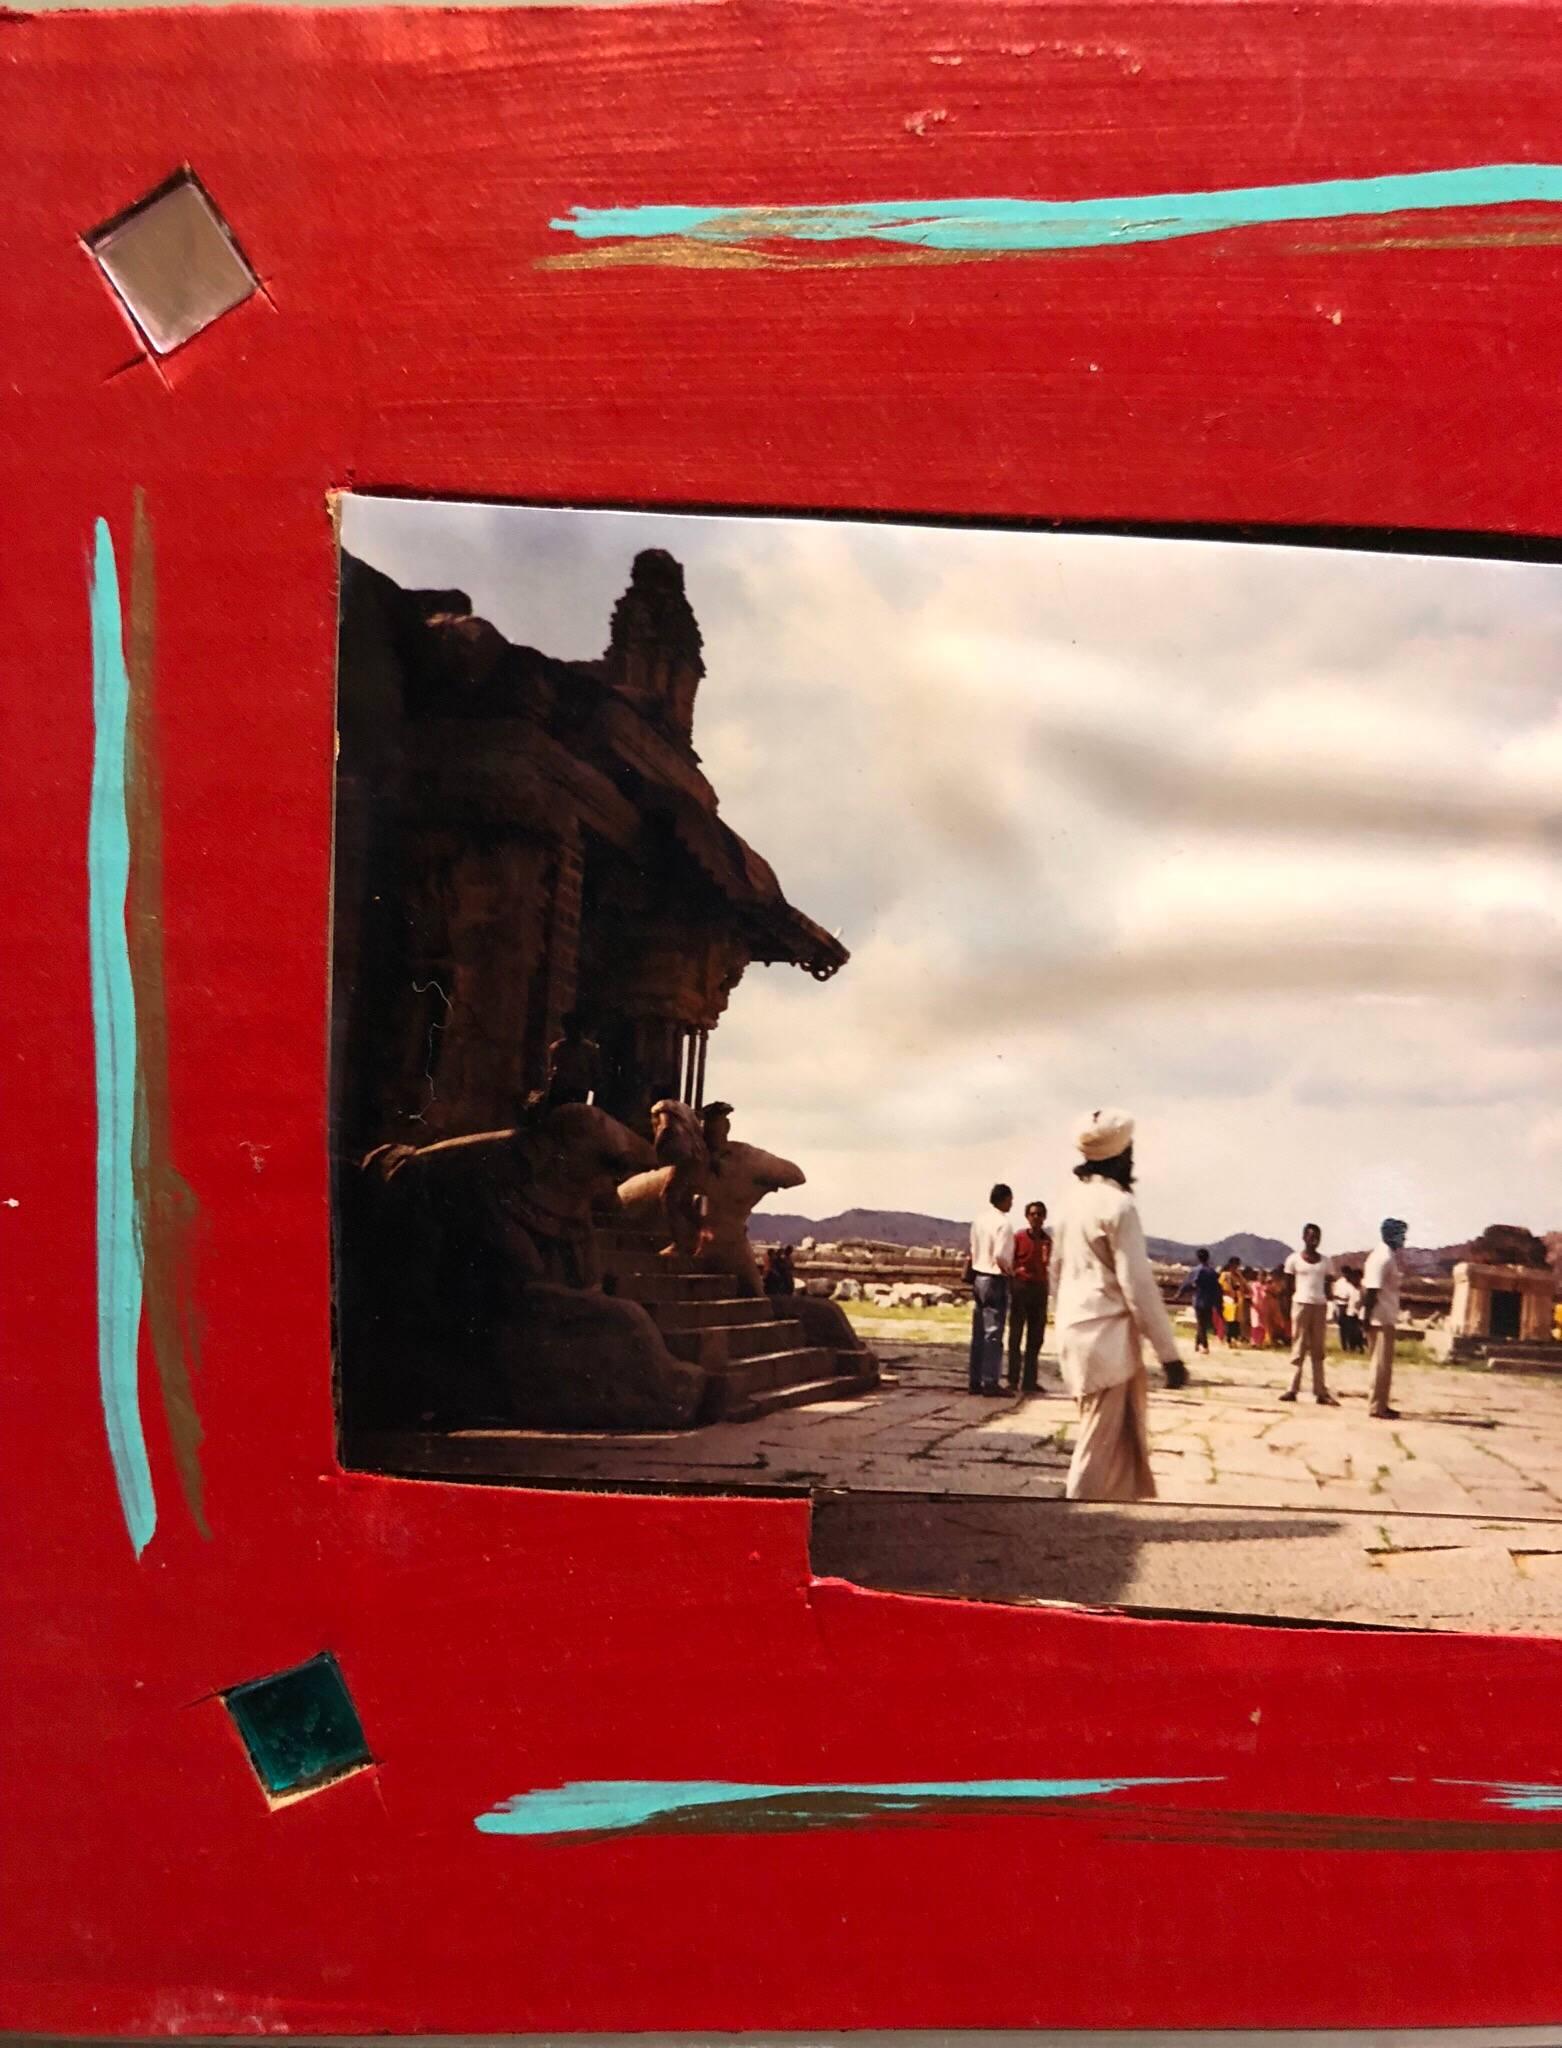 Tourists Hampi, India, 1992, Photo Prints on Cardboard, Collage, Mirror Insets For Sale 1